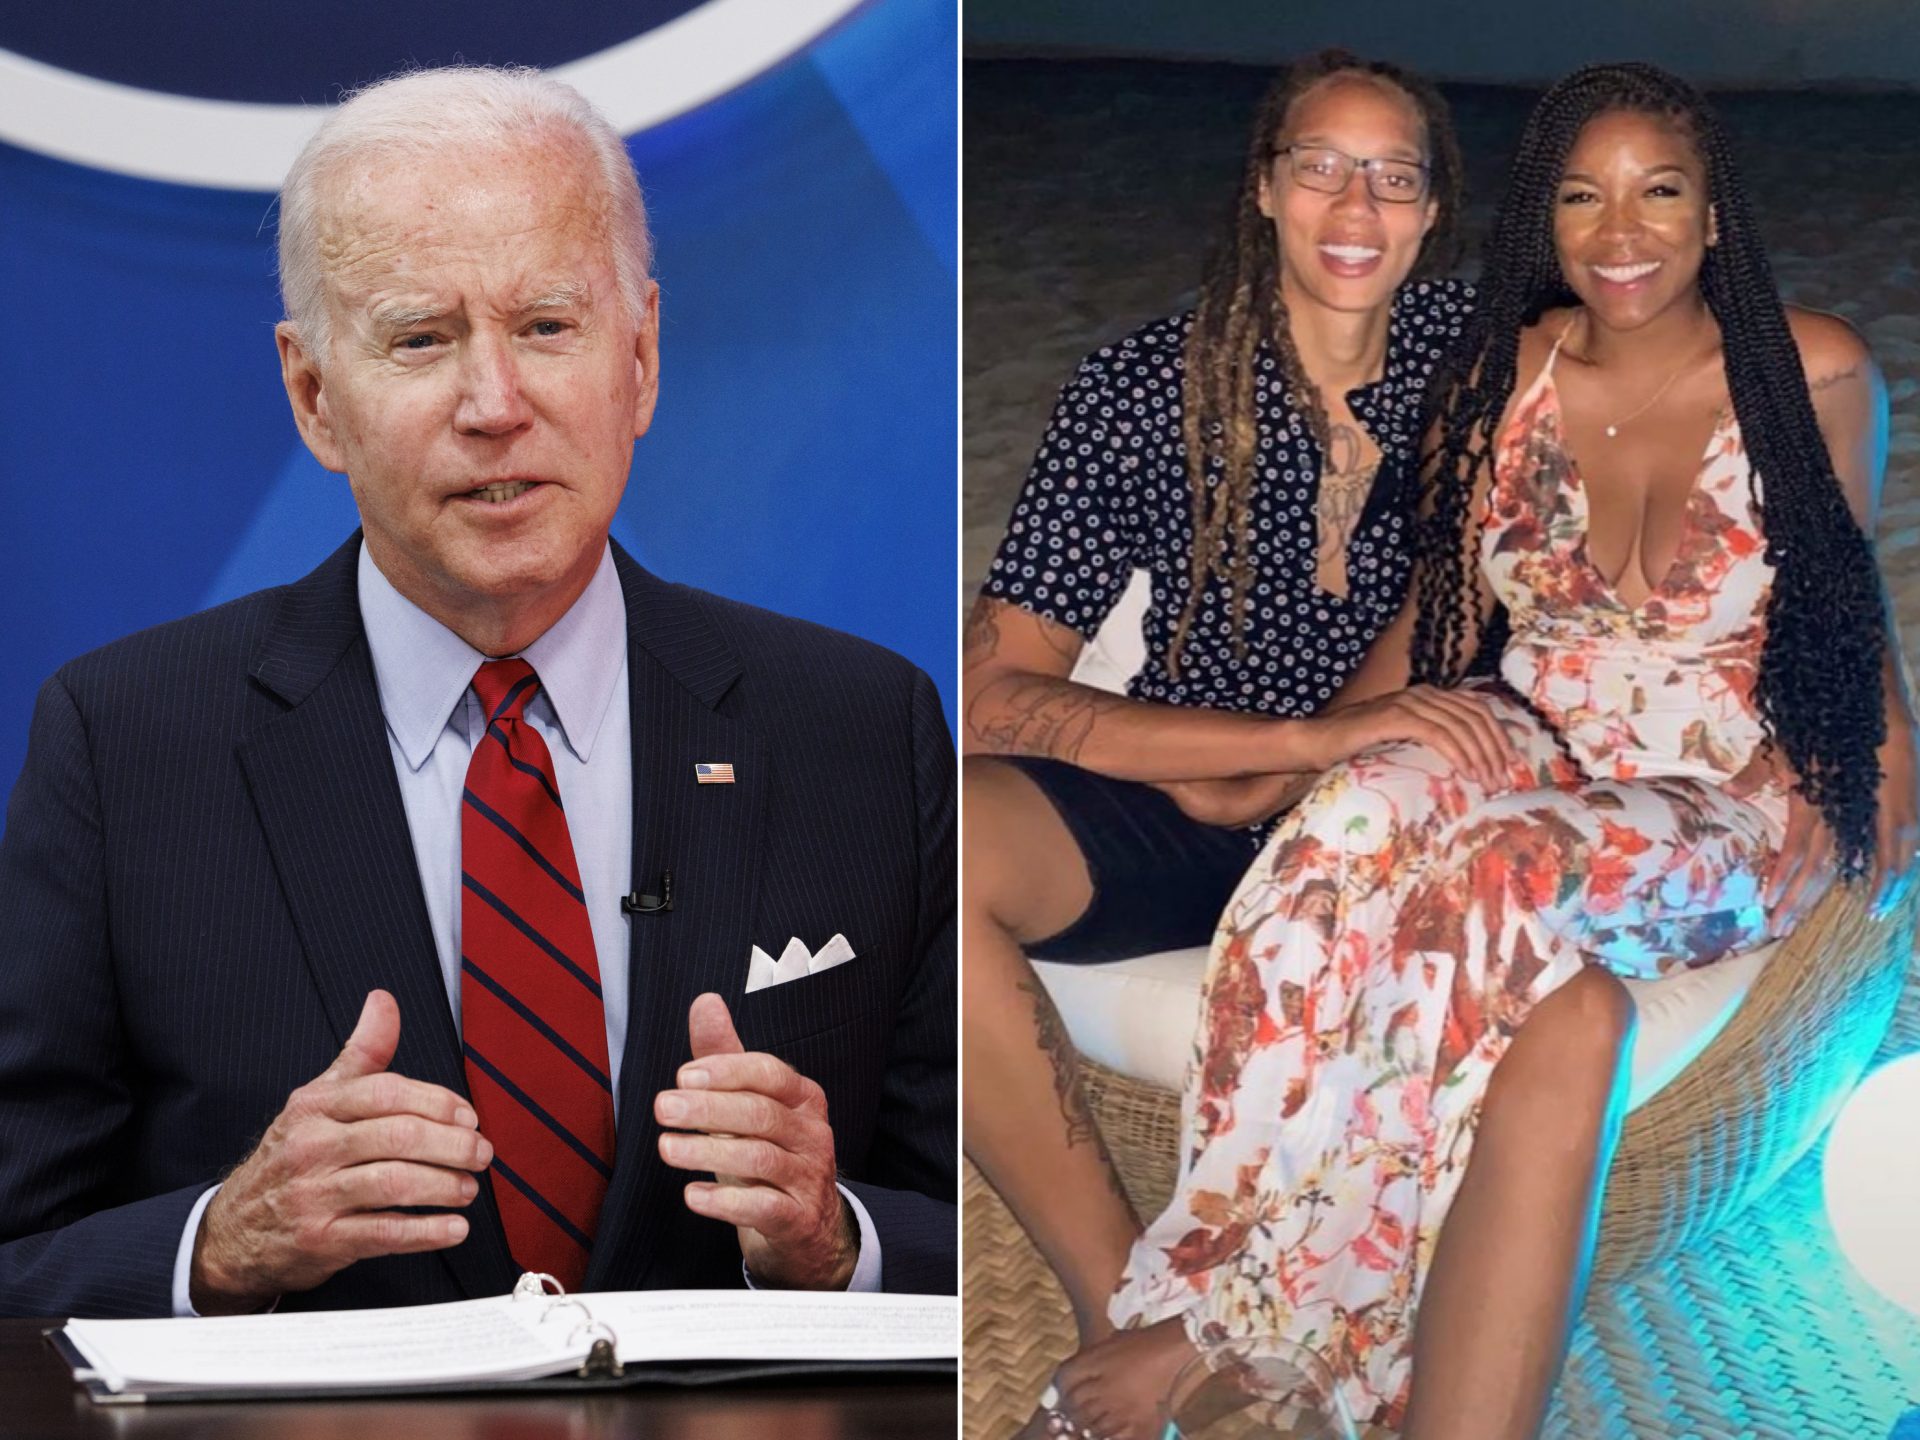 The White House says President Biden has spoken to Brittney Griner's wife after she sent him a letter asking to help bring her home.